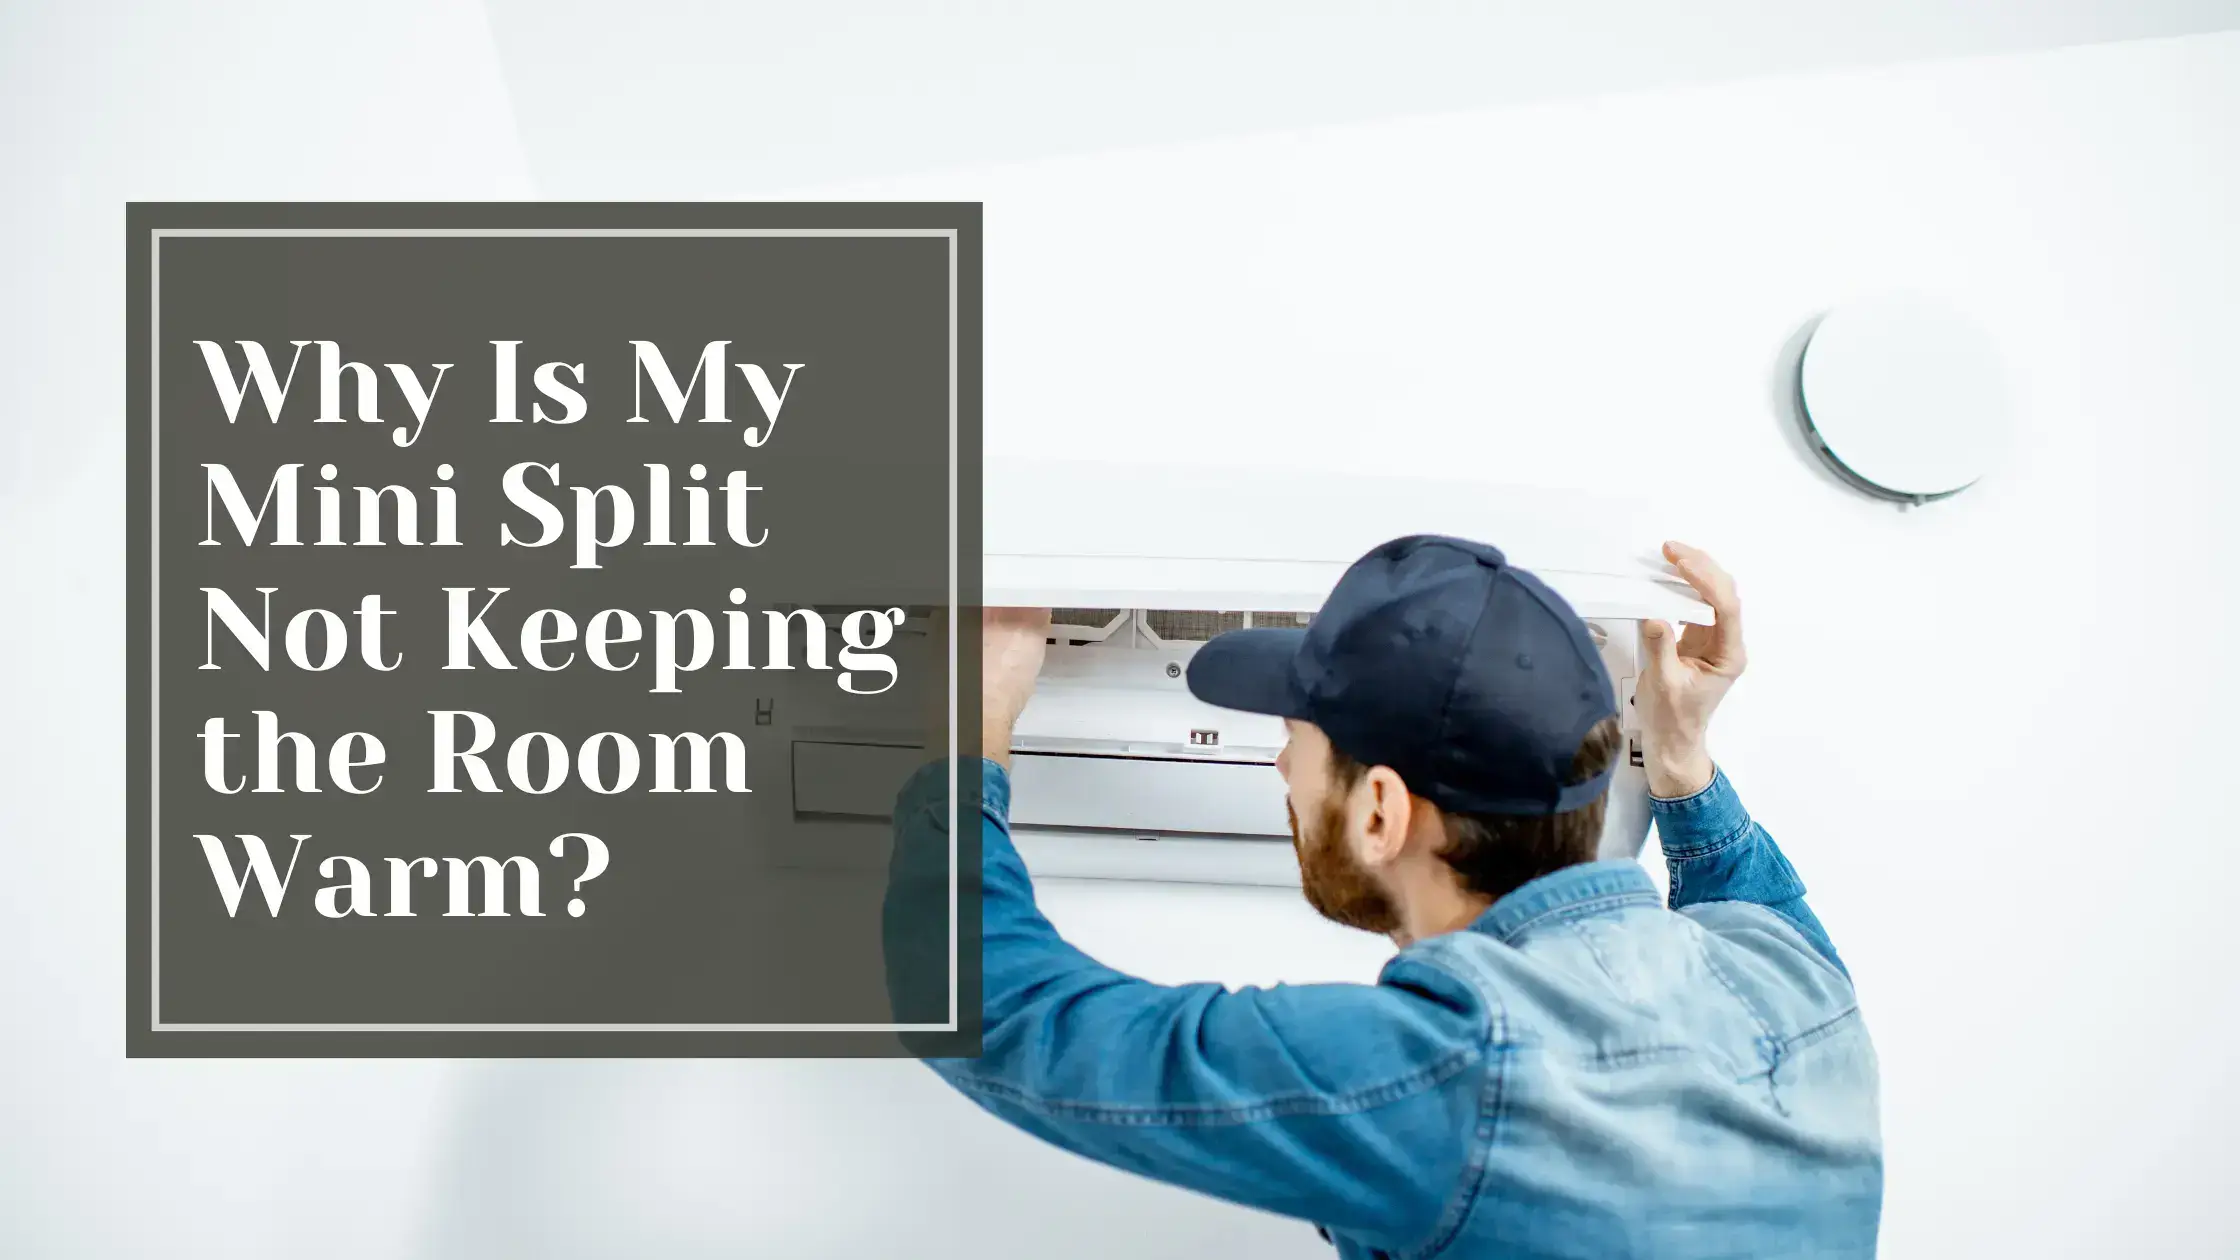 Why Is My Mini Split Not Keeping the Room Warm?